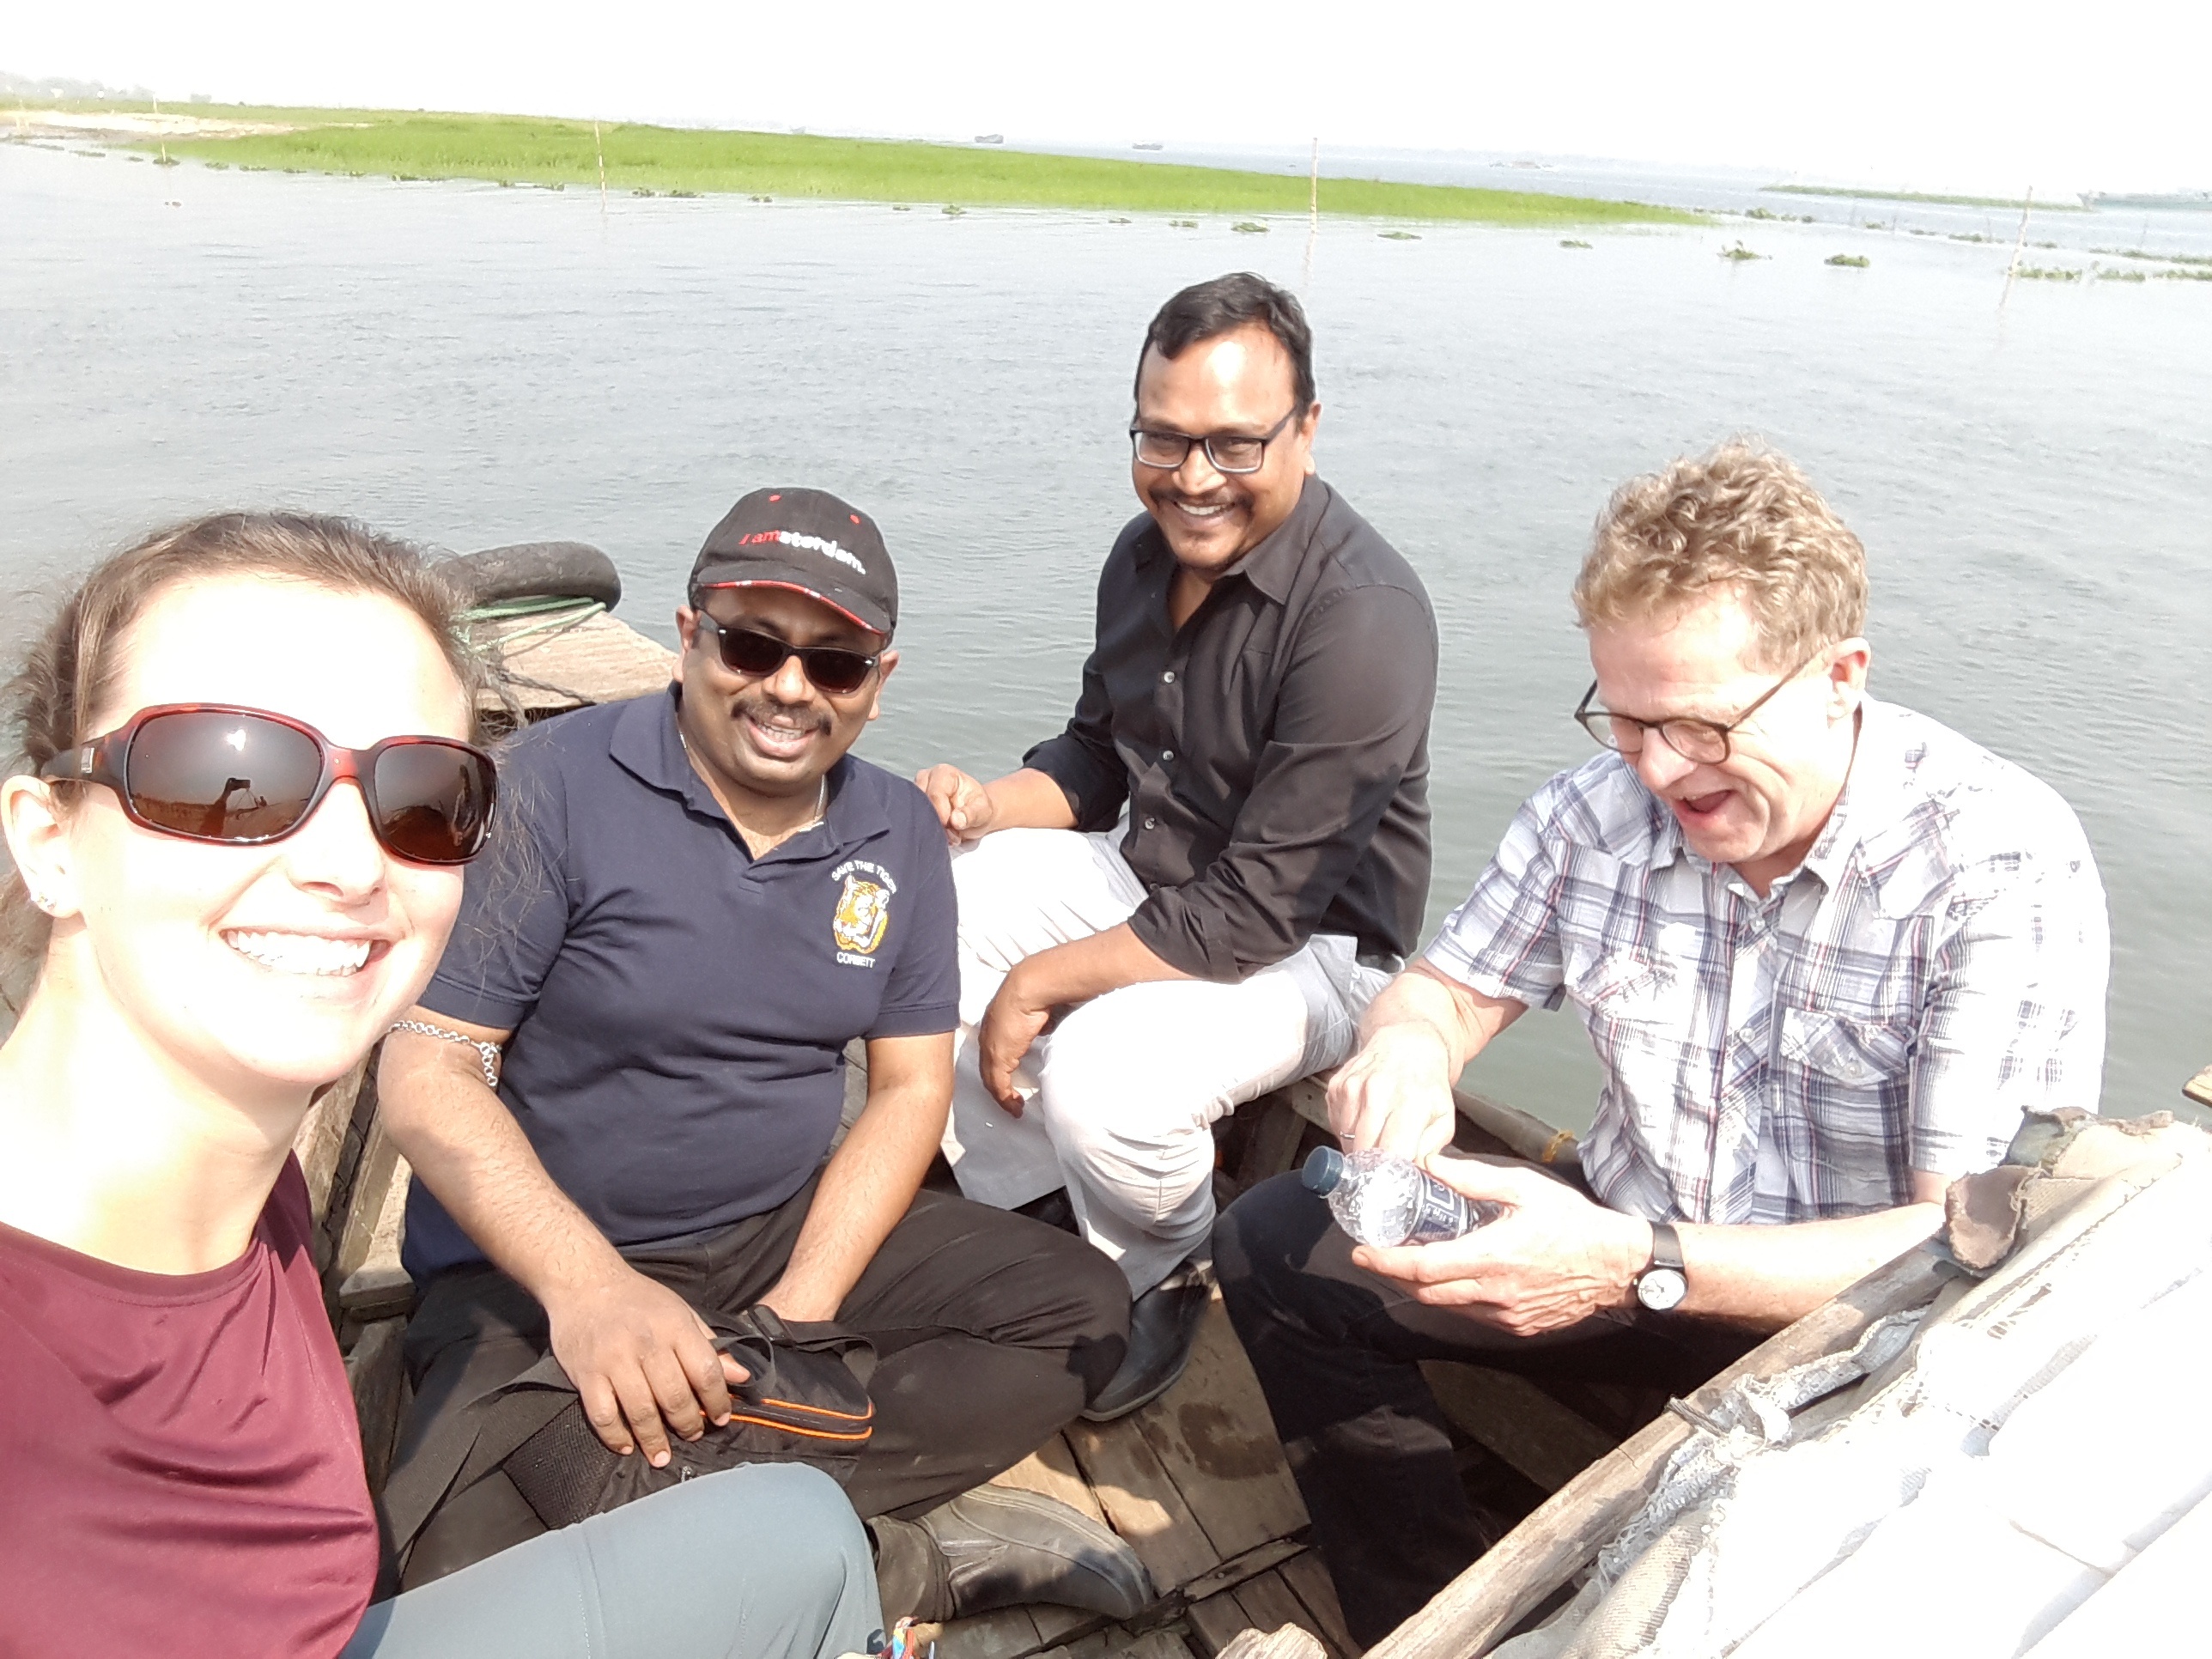 Team members Sheila (Deltares), Ayan (Akvo), Gabriel (ECL), and Hans (Deltares) taking water quality measurements on the Meghna River in February 2017.